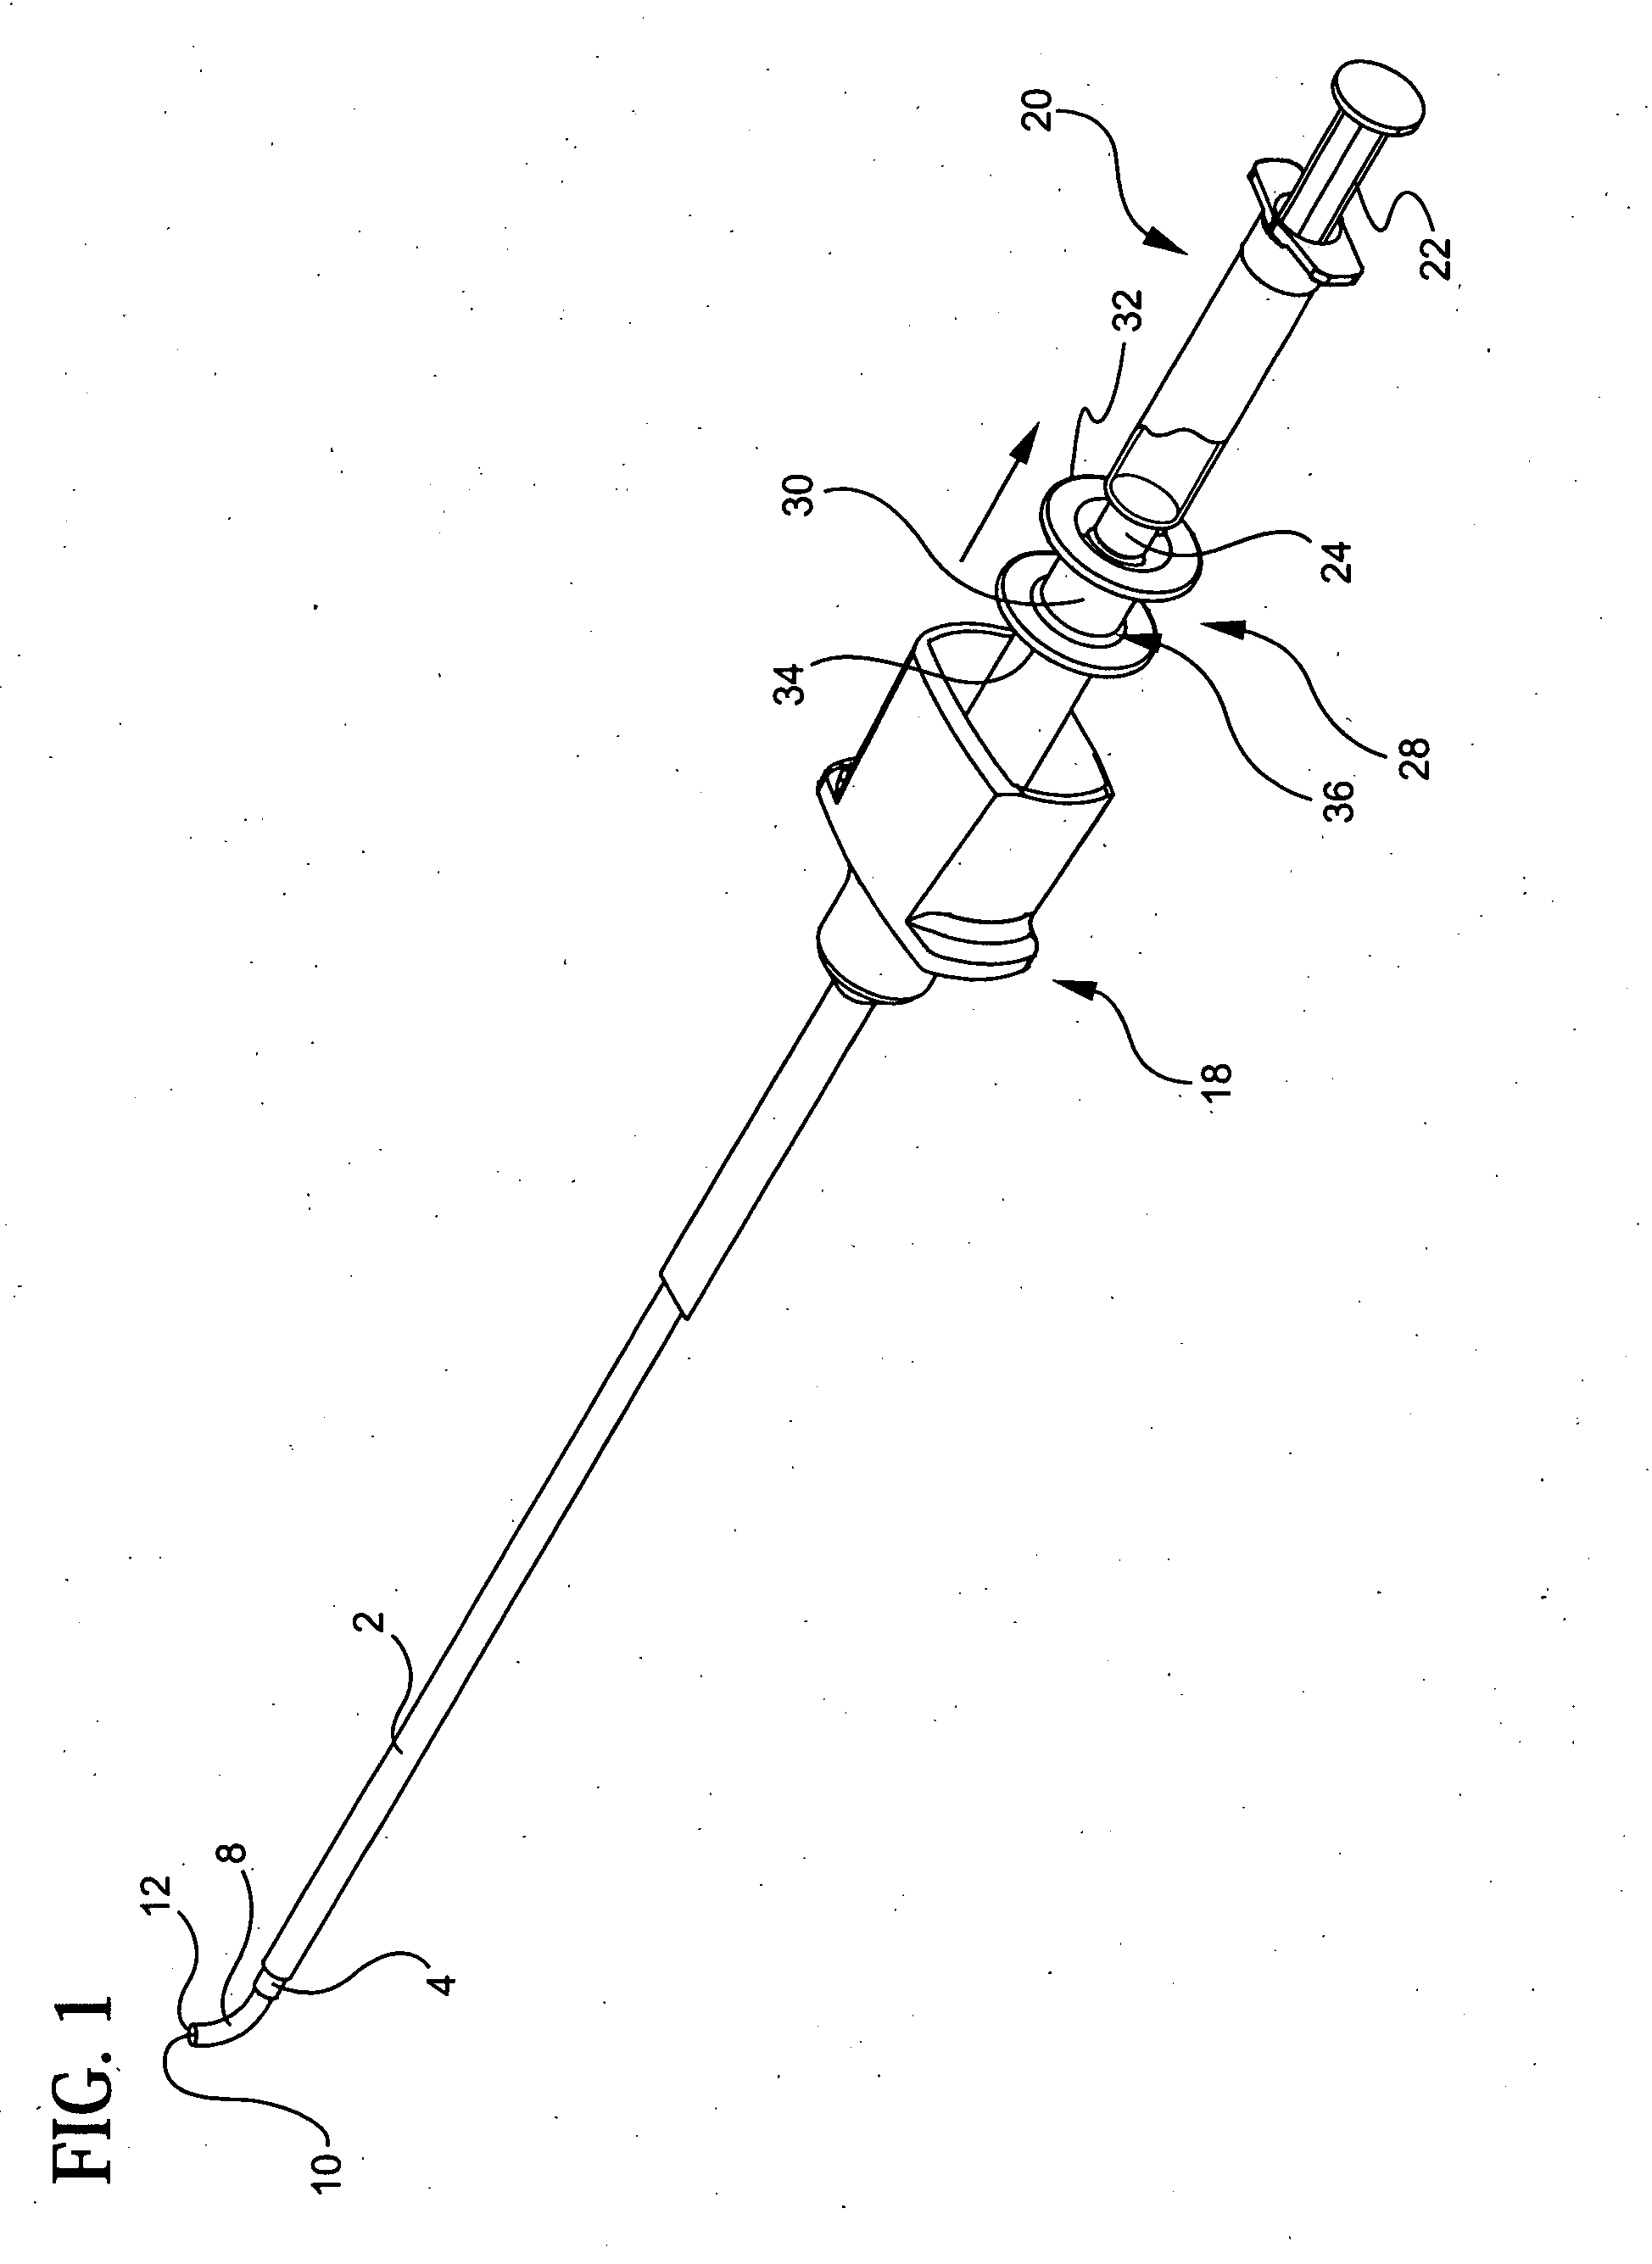 Articulating laparoscopic device and method for delivery of medical fluid